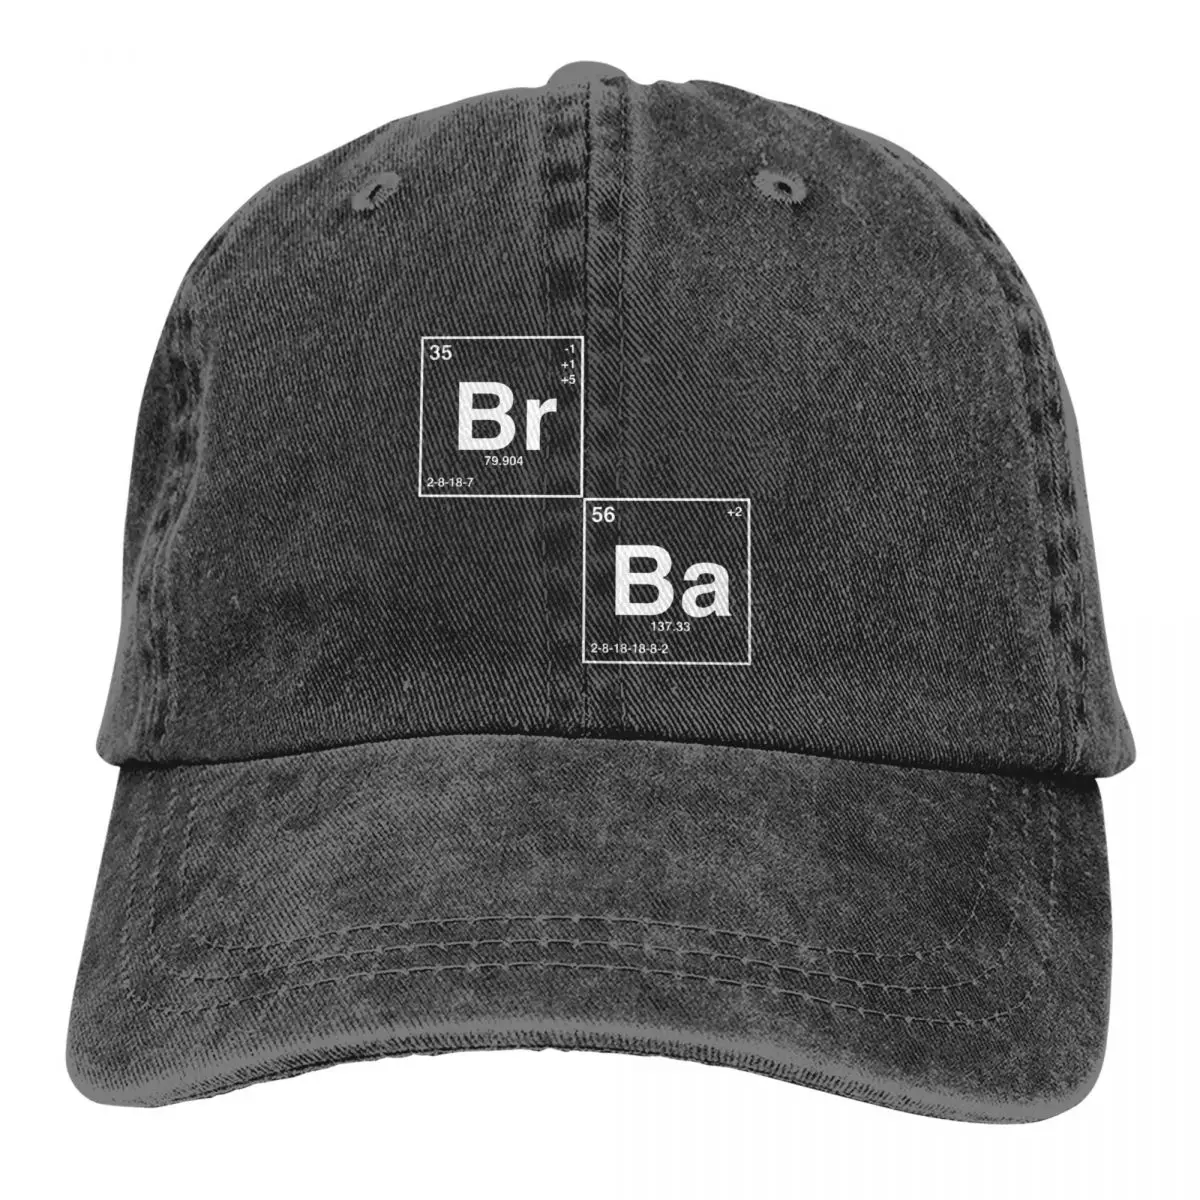 Breaking Bad Multicolor Hat Peaked Women's Cap Elements Inspired Personalized Visor Protection Hats